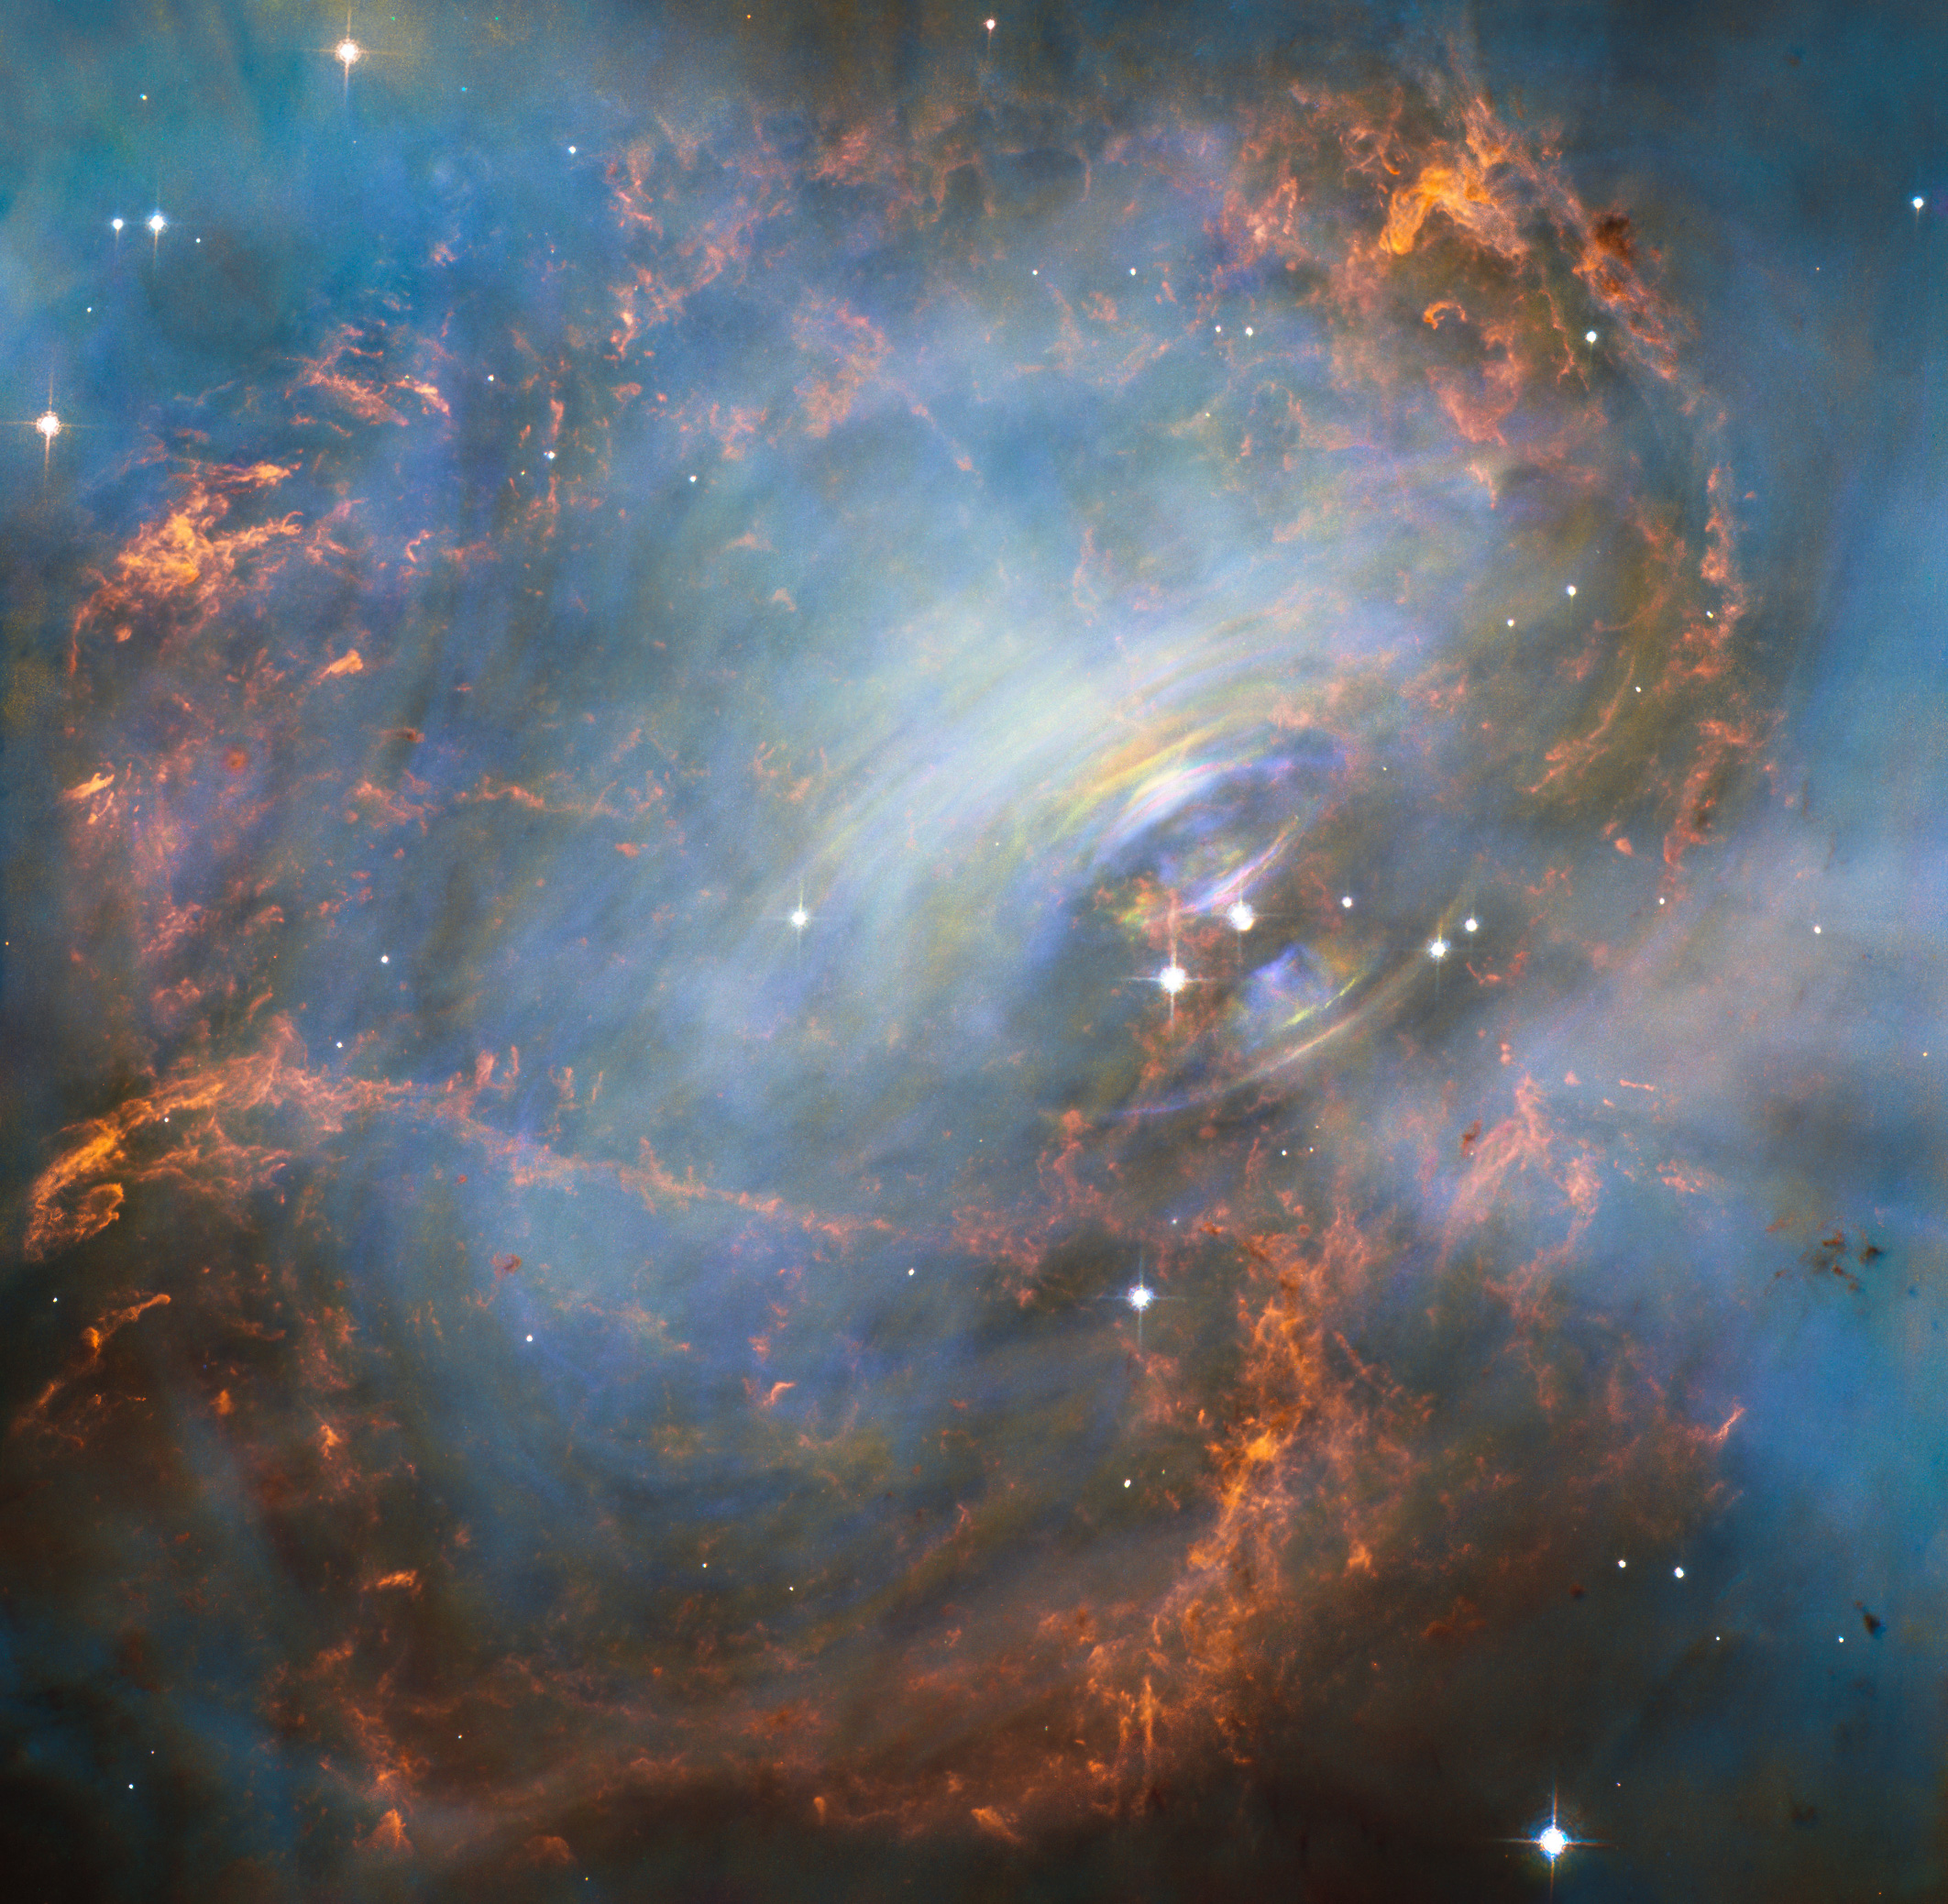 We Finally Know What’s Inside The Crab Nebula